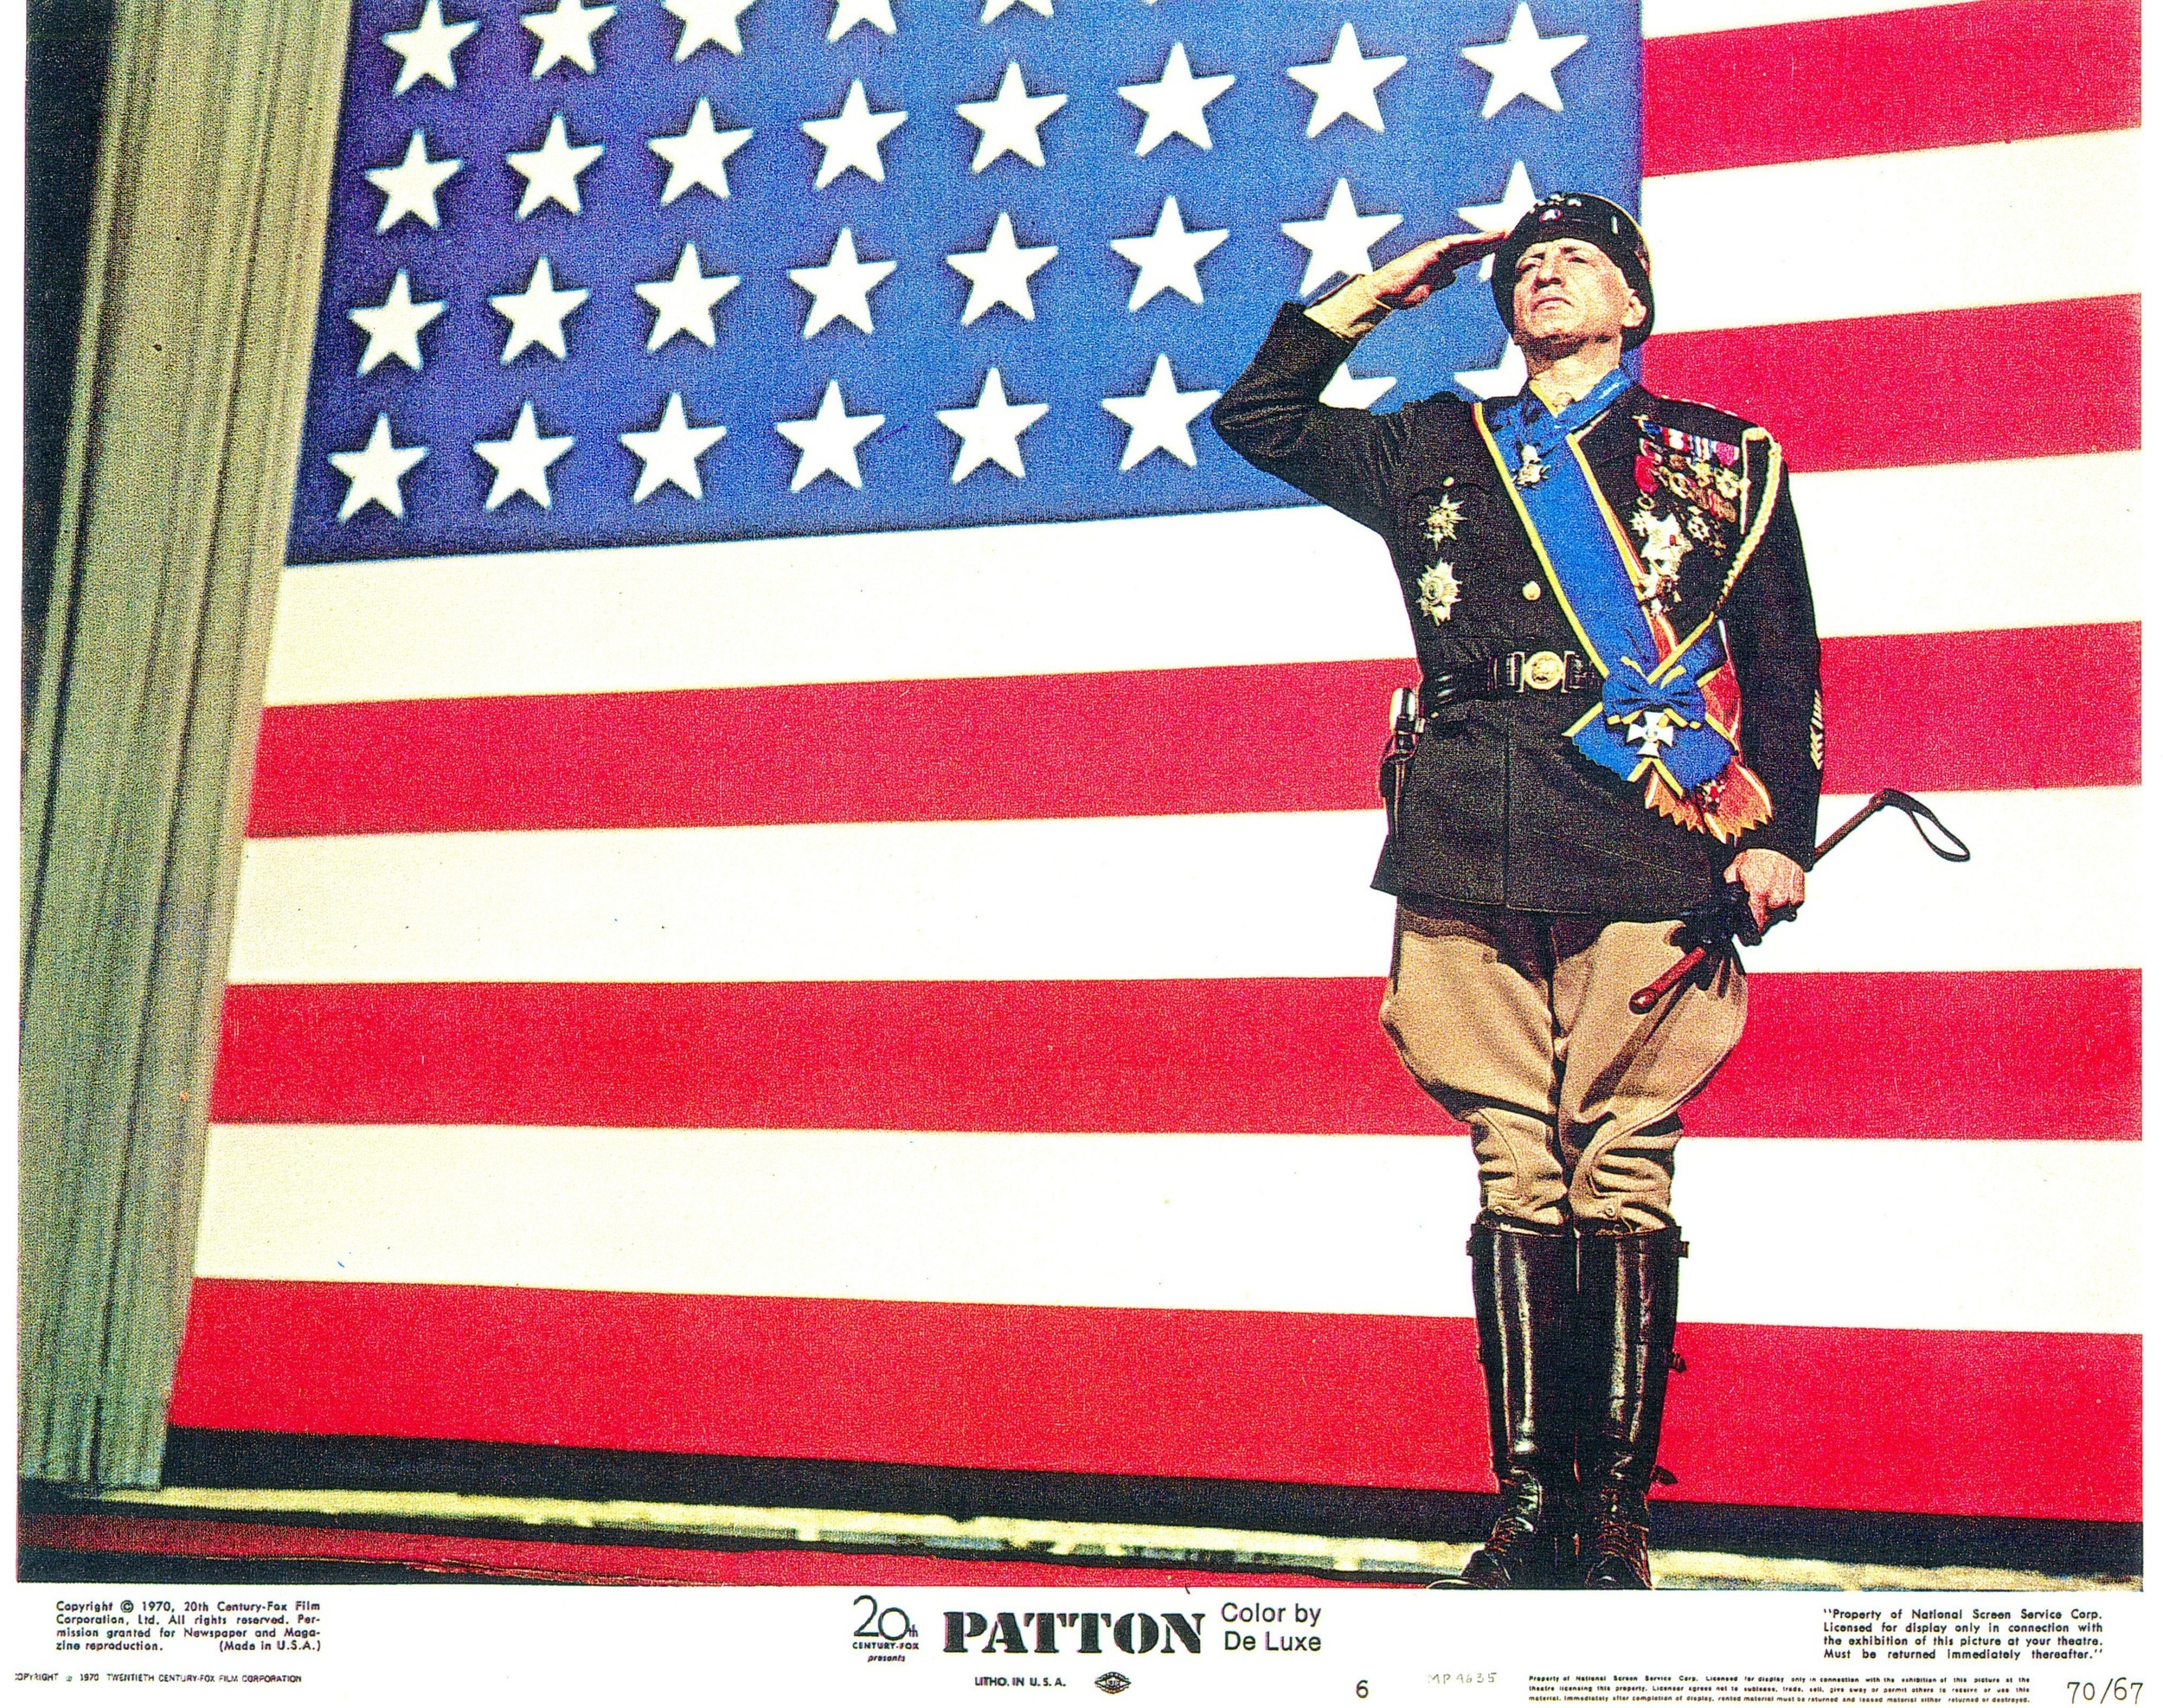 <p>George C. Scott may have refused his Oscar for <em>Patton</em>, which also won Best Picture, but you can understand why he won it. The film opens with a famed monologue in front of a giant American flag. That monologue is full of significant lines, beginning with Patton addressing his troops by declaring, “Now I want you to remember that no bastärd ever won a war by dying for his country. He won it by making the other poor dumb bastärd die for his country.”</p><p>You may also like: <a href='https://www.yardbarker.com/entertainment/articles/underrated_albums_from_legendary_bands_110223/s1__35171126'>Underrated albums from legendary bands</a></p>